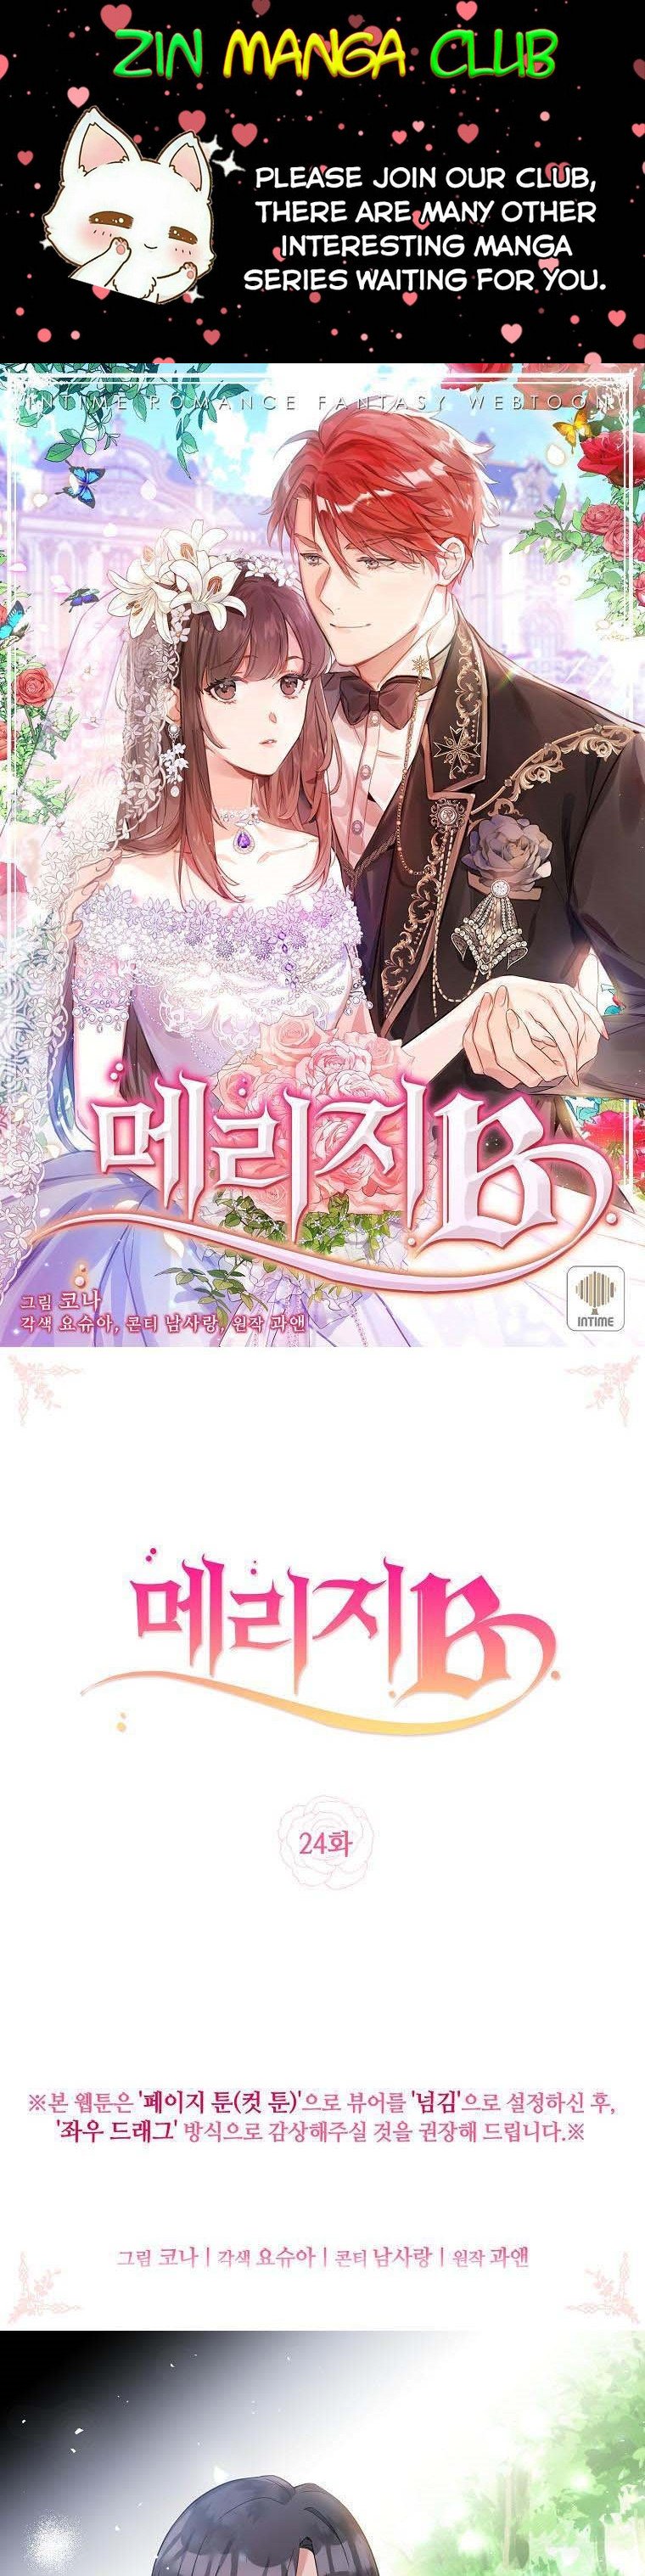 Marriage B chapter 24